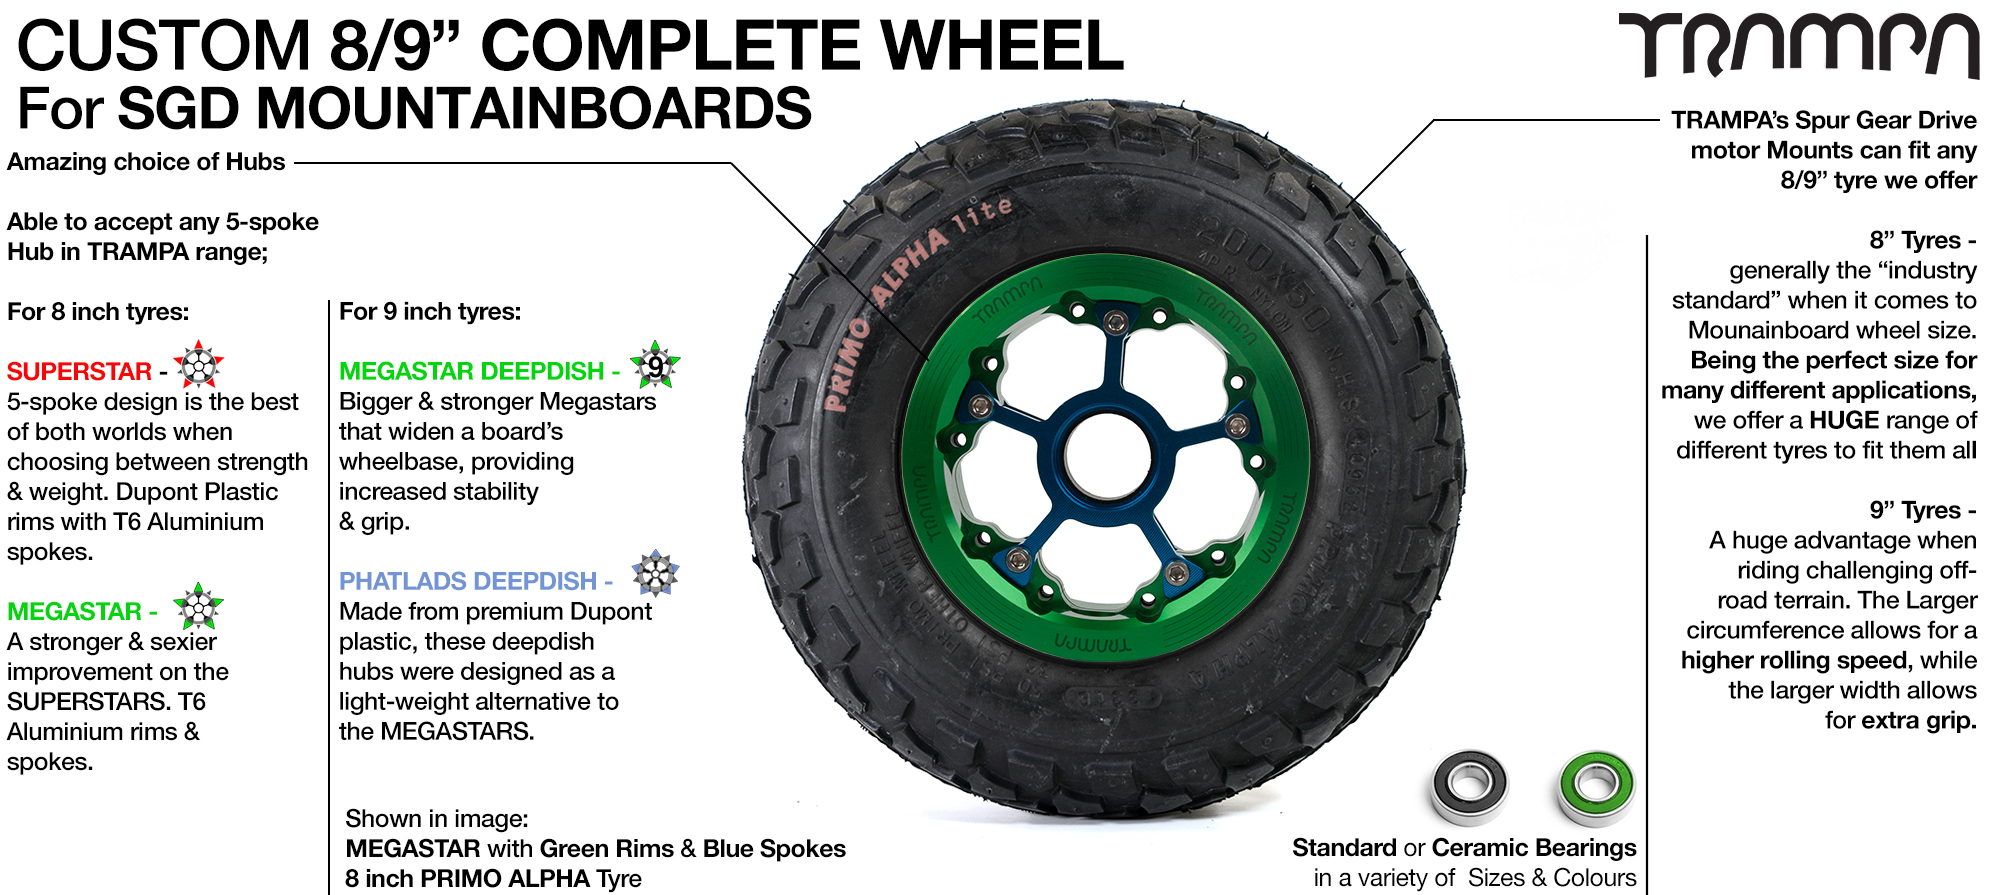 Build your own Custom TRAMPA Wheel - SUPERSTAR, 8 Inch MEGASTAR, 9 Inch PRIMO or 9 INCH DEEP DISH MEGASTAR Wheels! Awesome selection for on & off road! Amazing!!